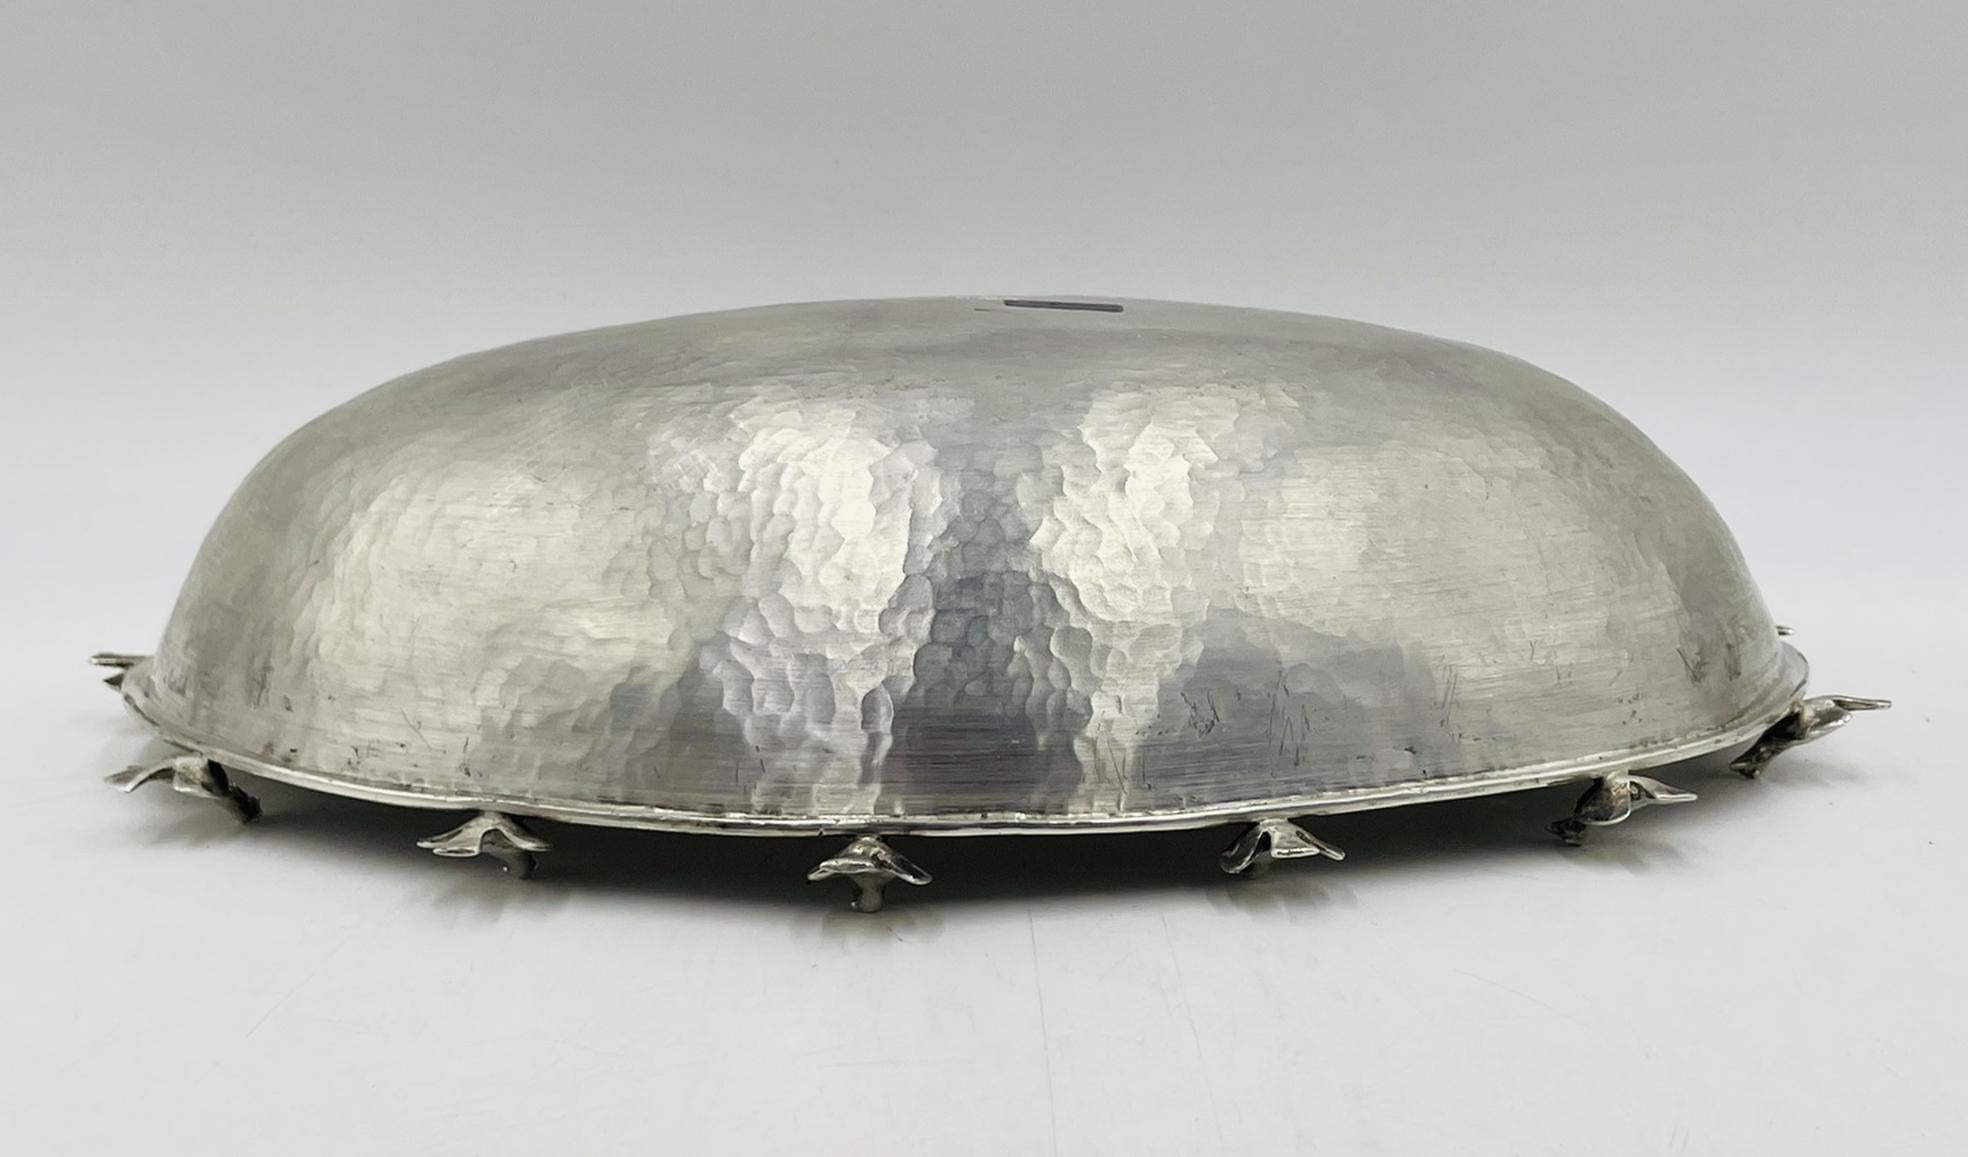 Contemporary Silver-Plate Bowl with Bird Detail on Volcanic Rock baseby Emilia Castillo For Sale